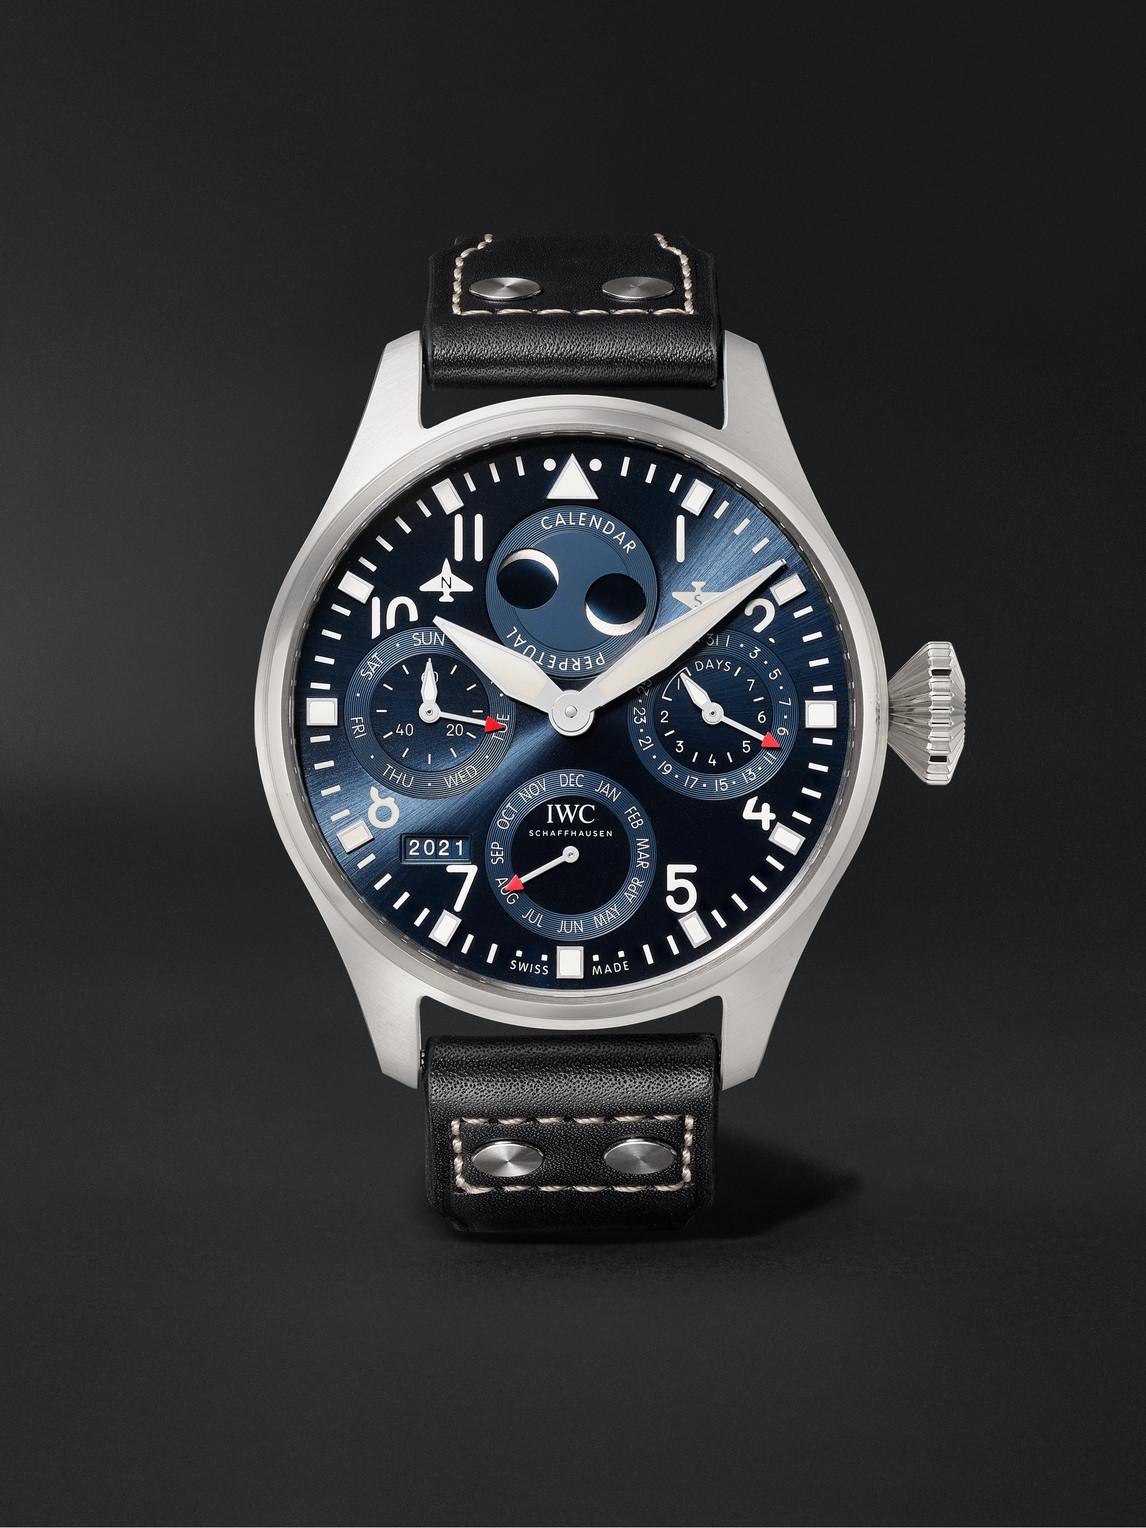 Big Pilot's Automatic Perpetual Calendar 46.2mm Stainless Steel and Leather Watch, Ref. No. IW503605